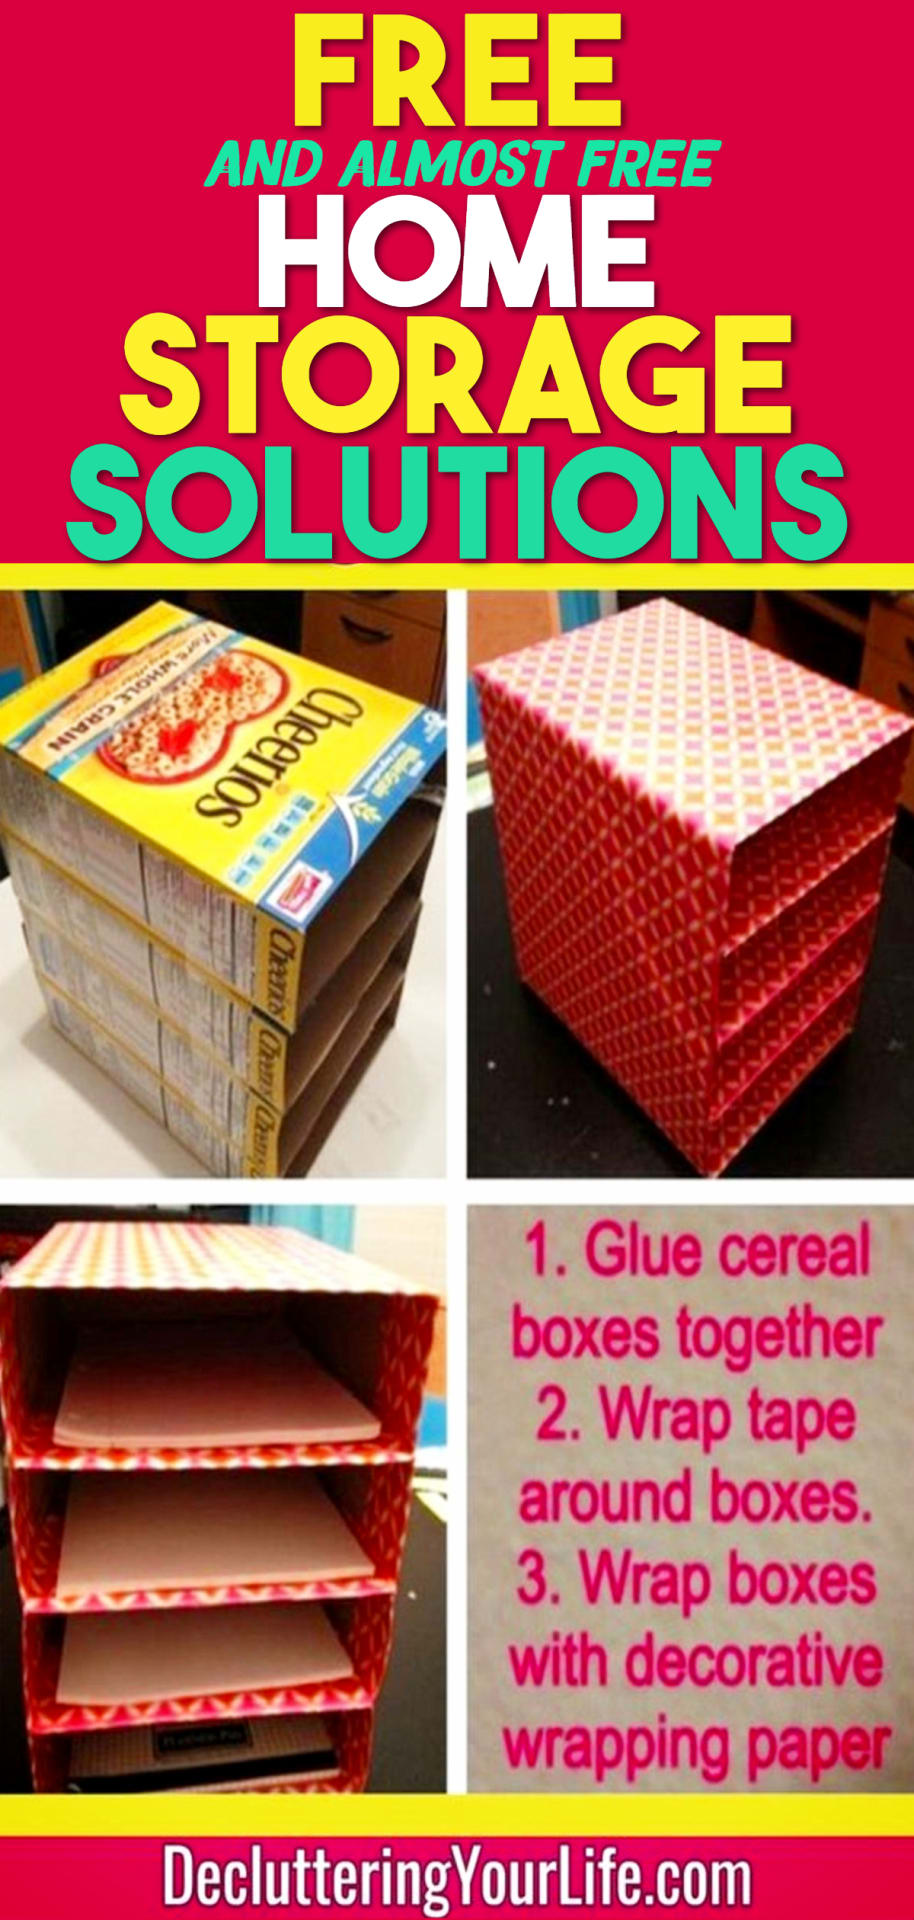 Free Home Organization Storage Solutions - Cheap Ways To Organize Your Home On a Budget - 33 Free (and ALMOST free) Home Organization Hacks To Get Organized on a Tight Budget - Budget-friendly organization tips for the frugal organizer for saving money while you unclutter your home and declutter your life